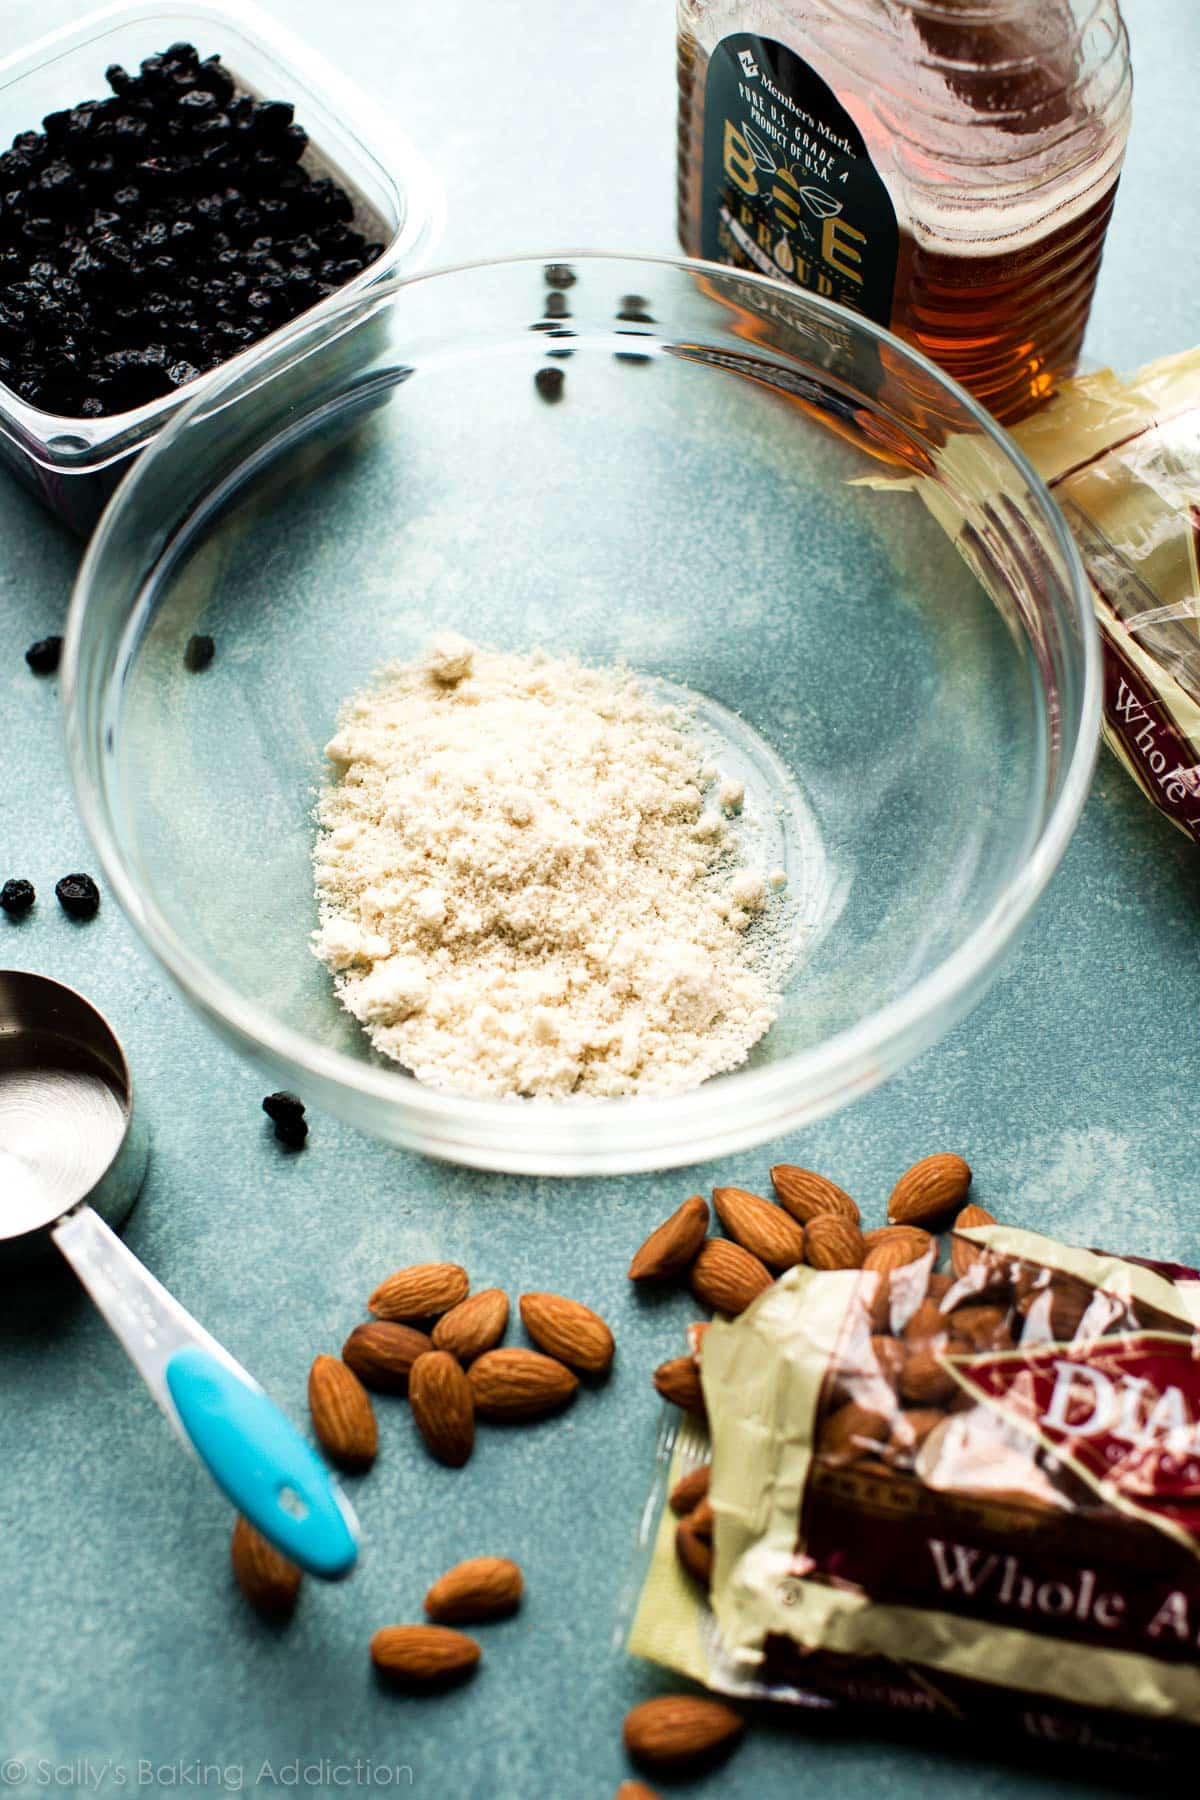 blueberry almond snack bar ingredients with a glass bowl